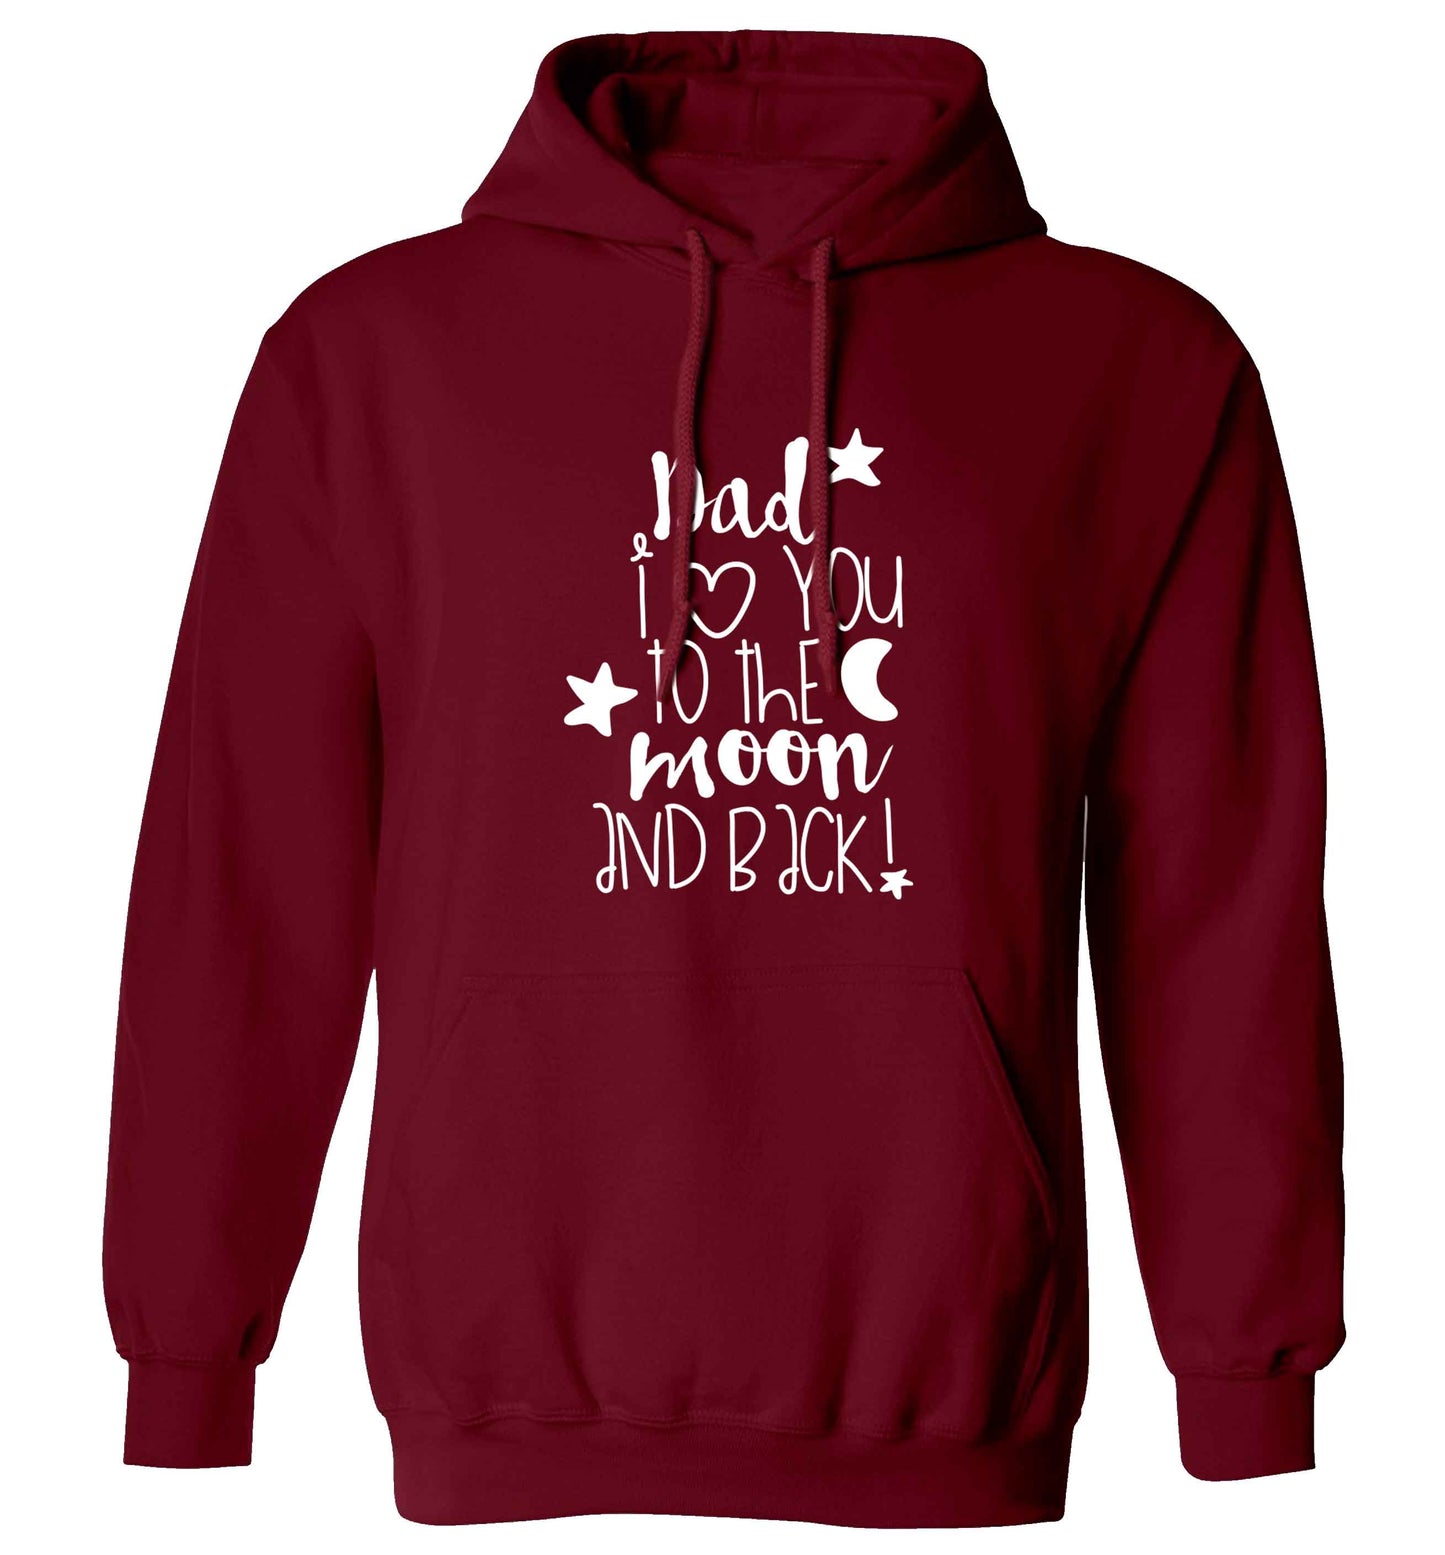 Dad I love you to the moon and back adults unisex maroon hoodie 2XL